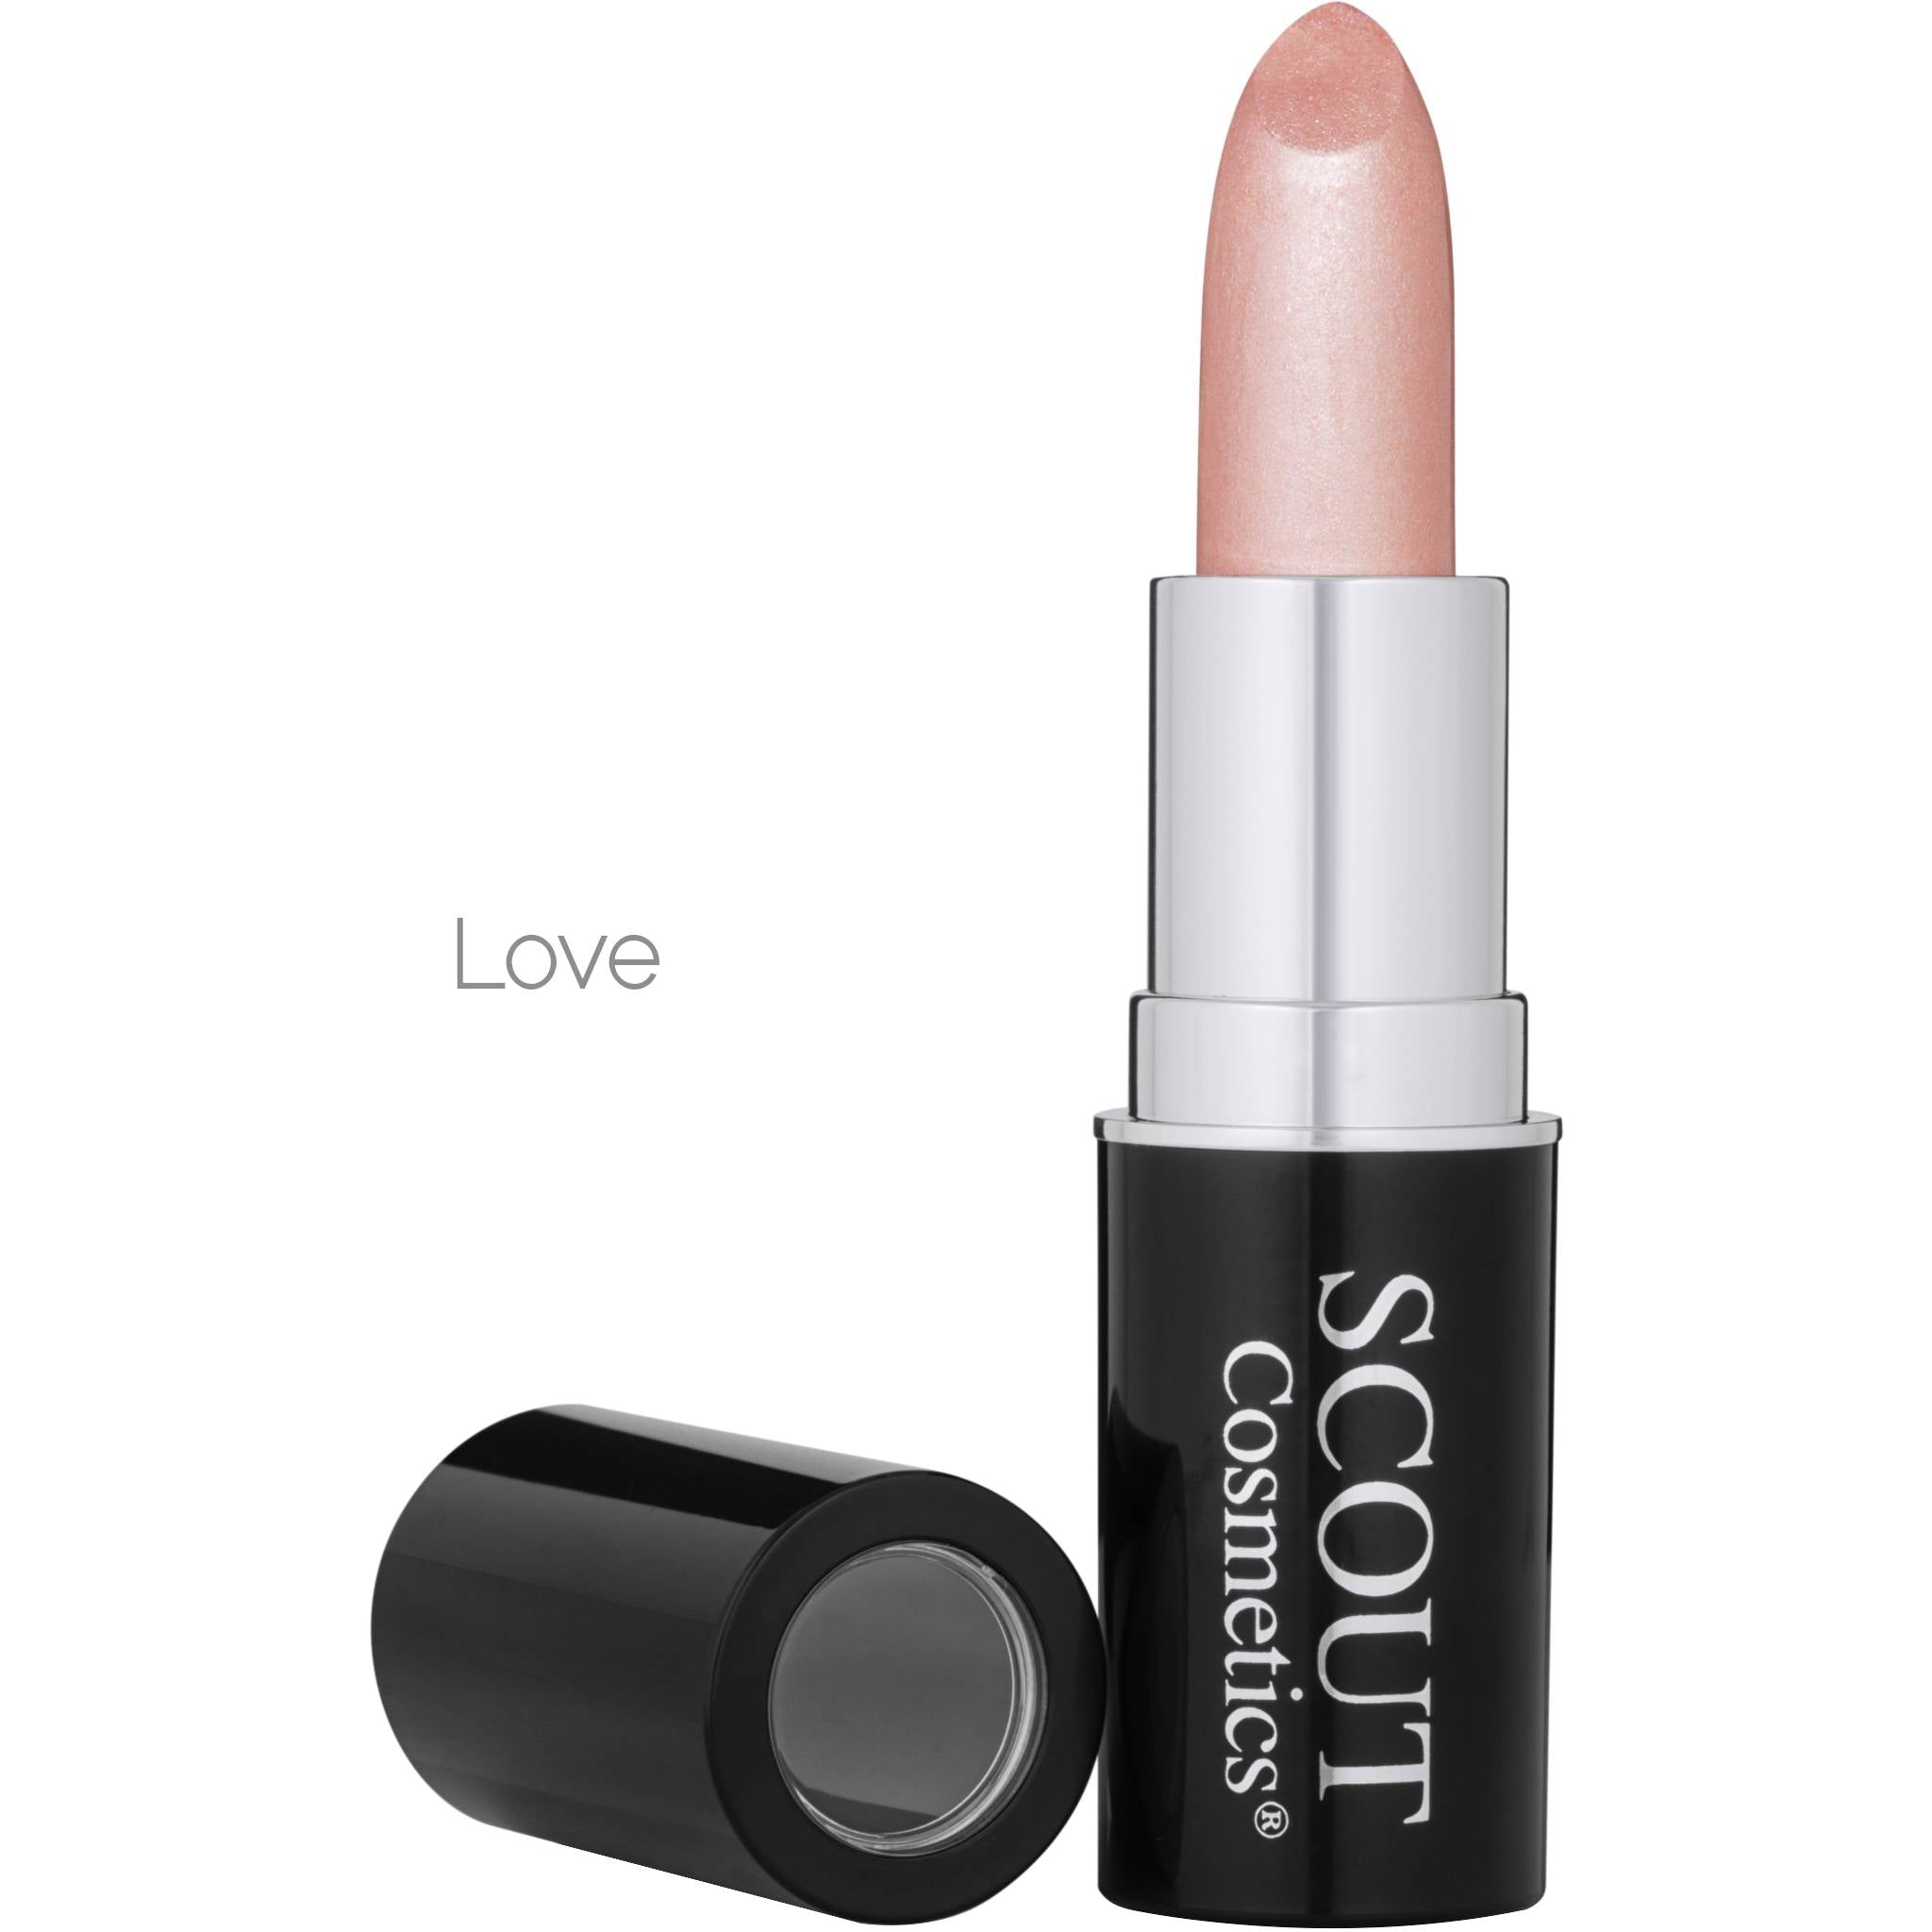 Love – Whisper pink with a beautiful light shimmerPure Colour Lipstick with Camellia, Jojoba, Damask Rose & Shea Butter